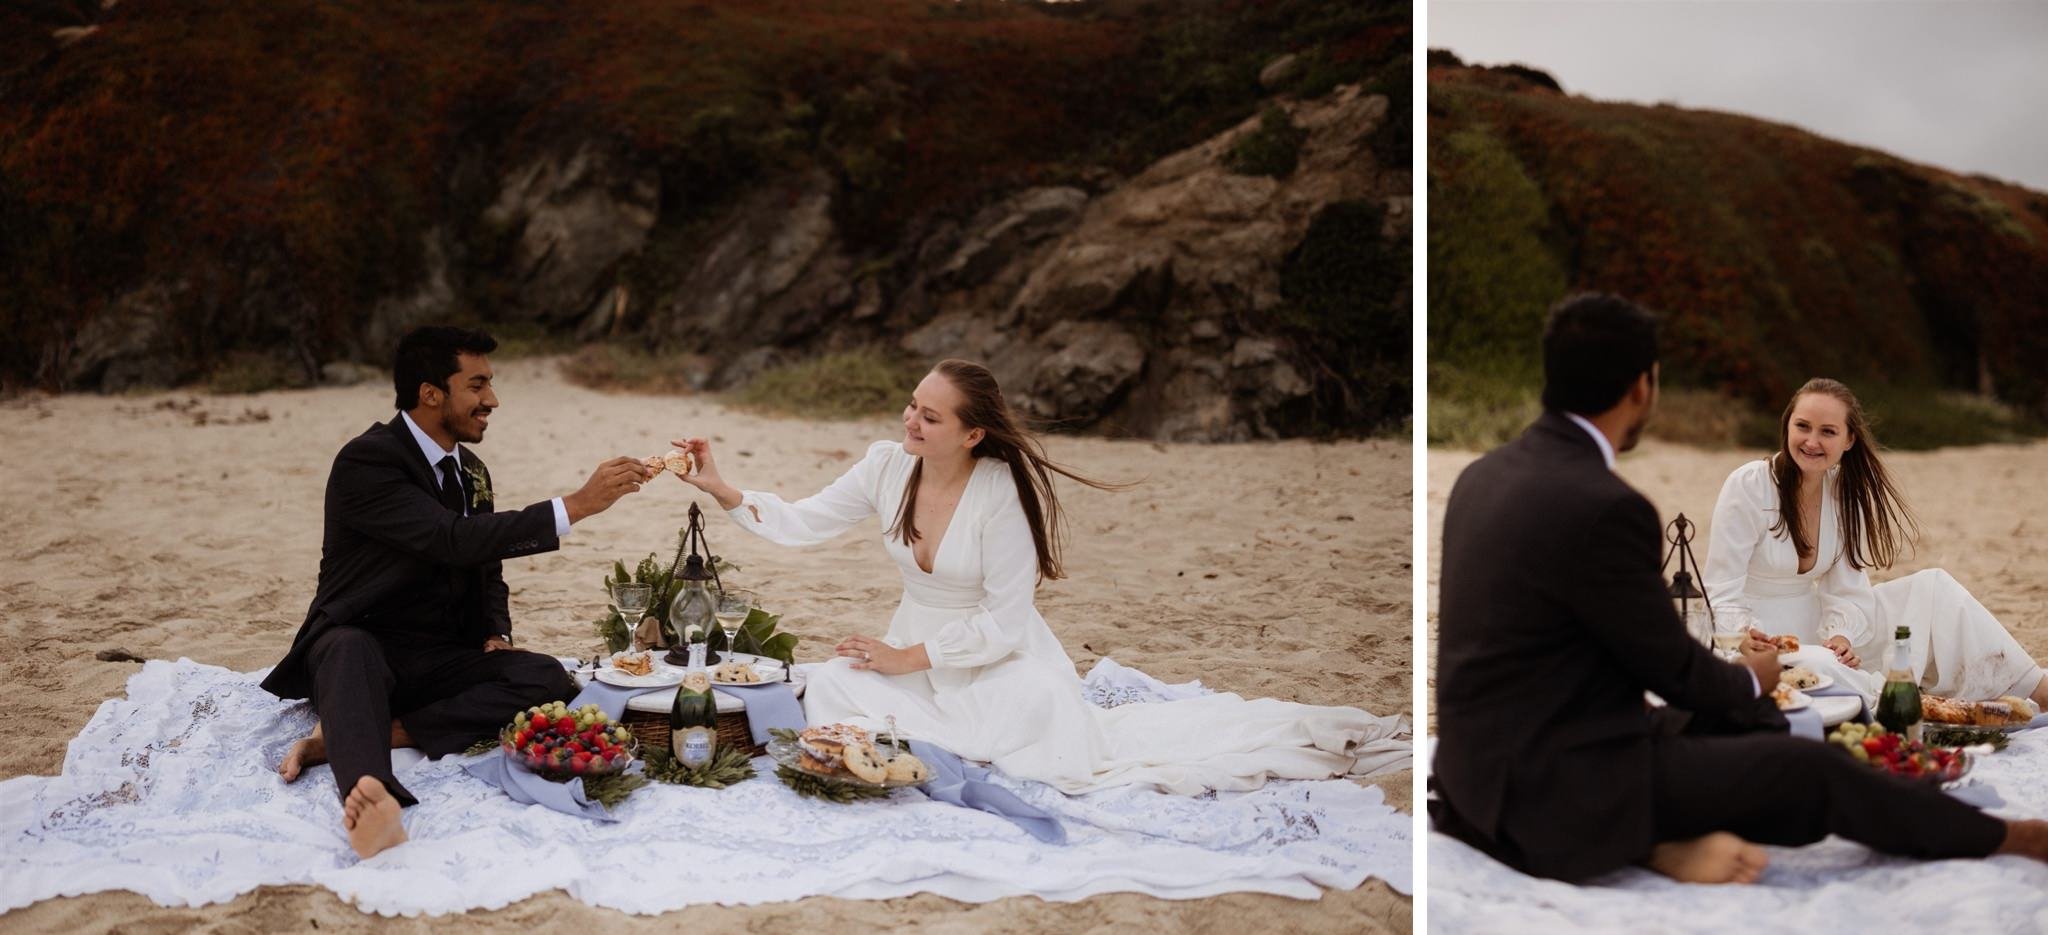 119_Two-Day Big Sur Redwoods Elopement with Family_Will Khoury Elopement Photographer.jpg